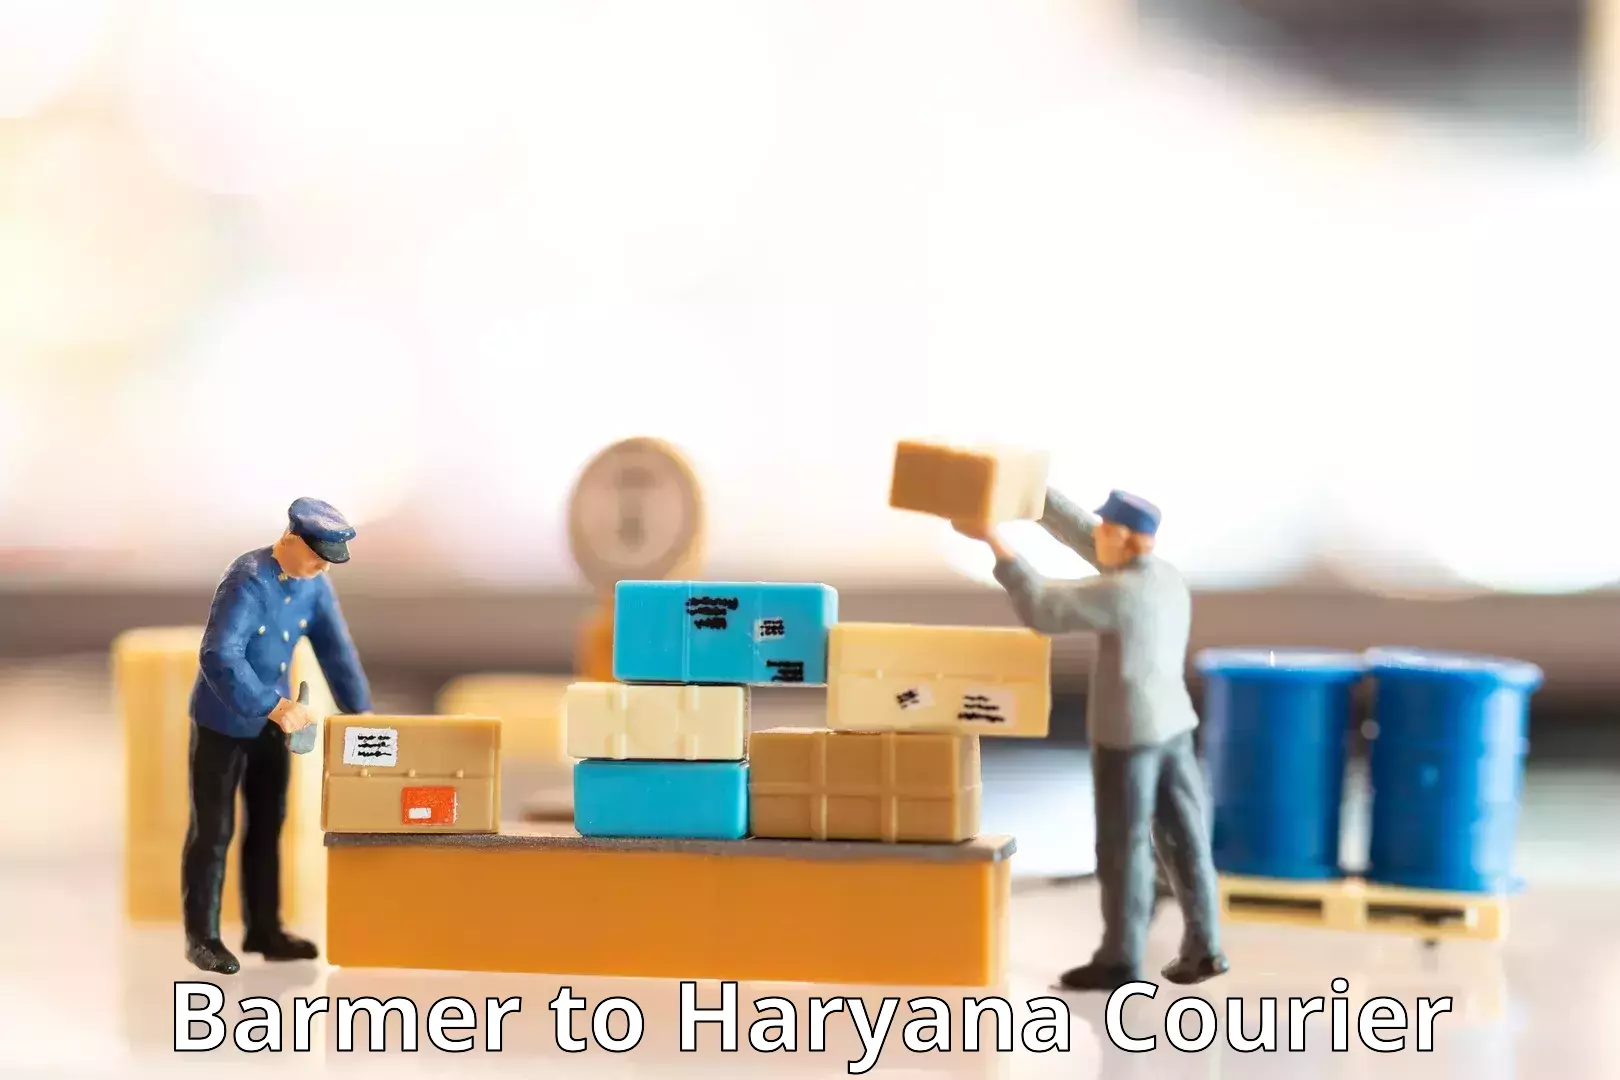 24/7 courier service Barmer to Bilaspur Haryana